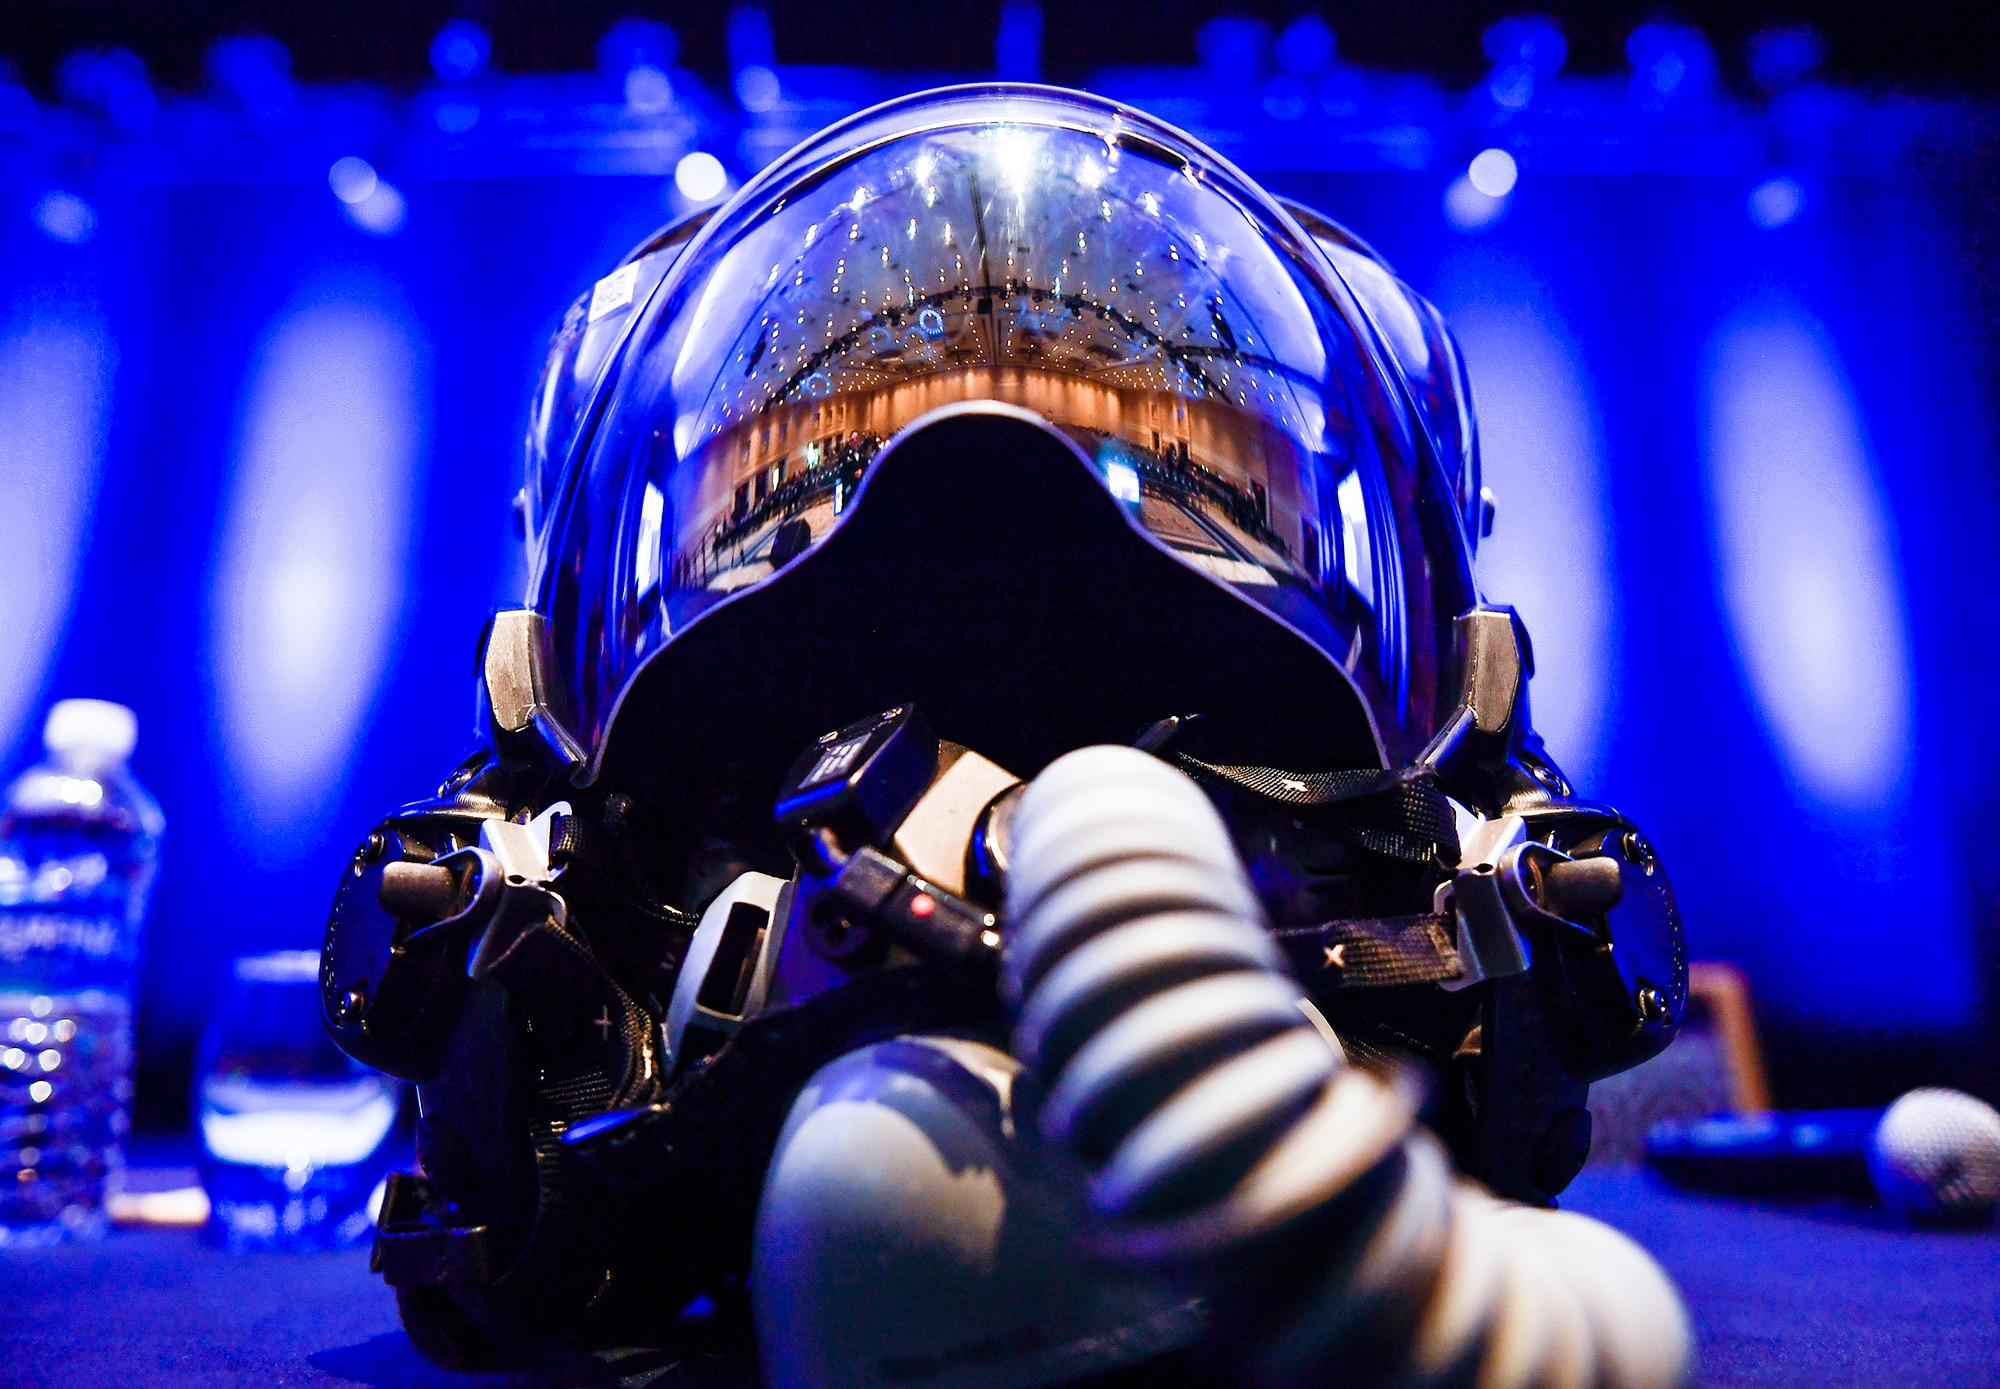 An F-35 Lightning II helmet sits on stage during the F-35 reaching initial operational capability panel discussion during the Air Force Association's Air, Space and Cyber Conference in National Harbor, Md., Sept. 20, 2016.  The F-35’s helmet mounted display system is the most advanced system of its kind. All the intelligence and targeting information an F-35 pilot needs to complete the mission is displayed on the helmet’s visor. (U.S. Air Force photo/Tech. Sgt. Anthony Nelson Jr.)